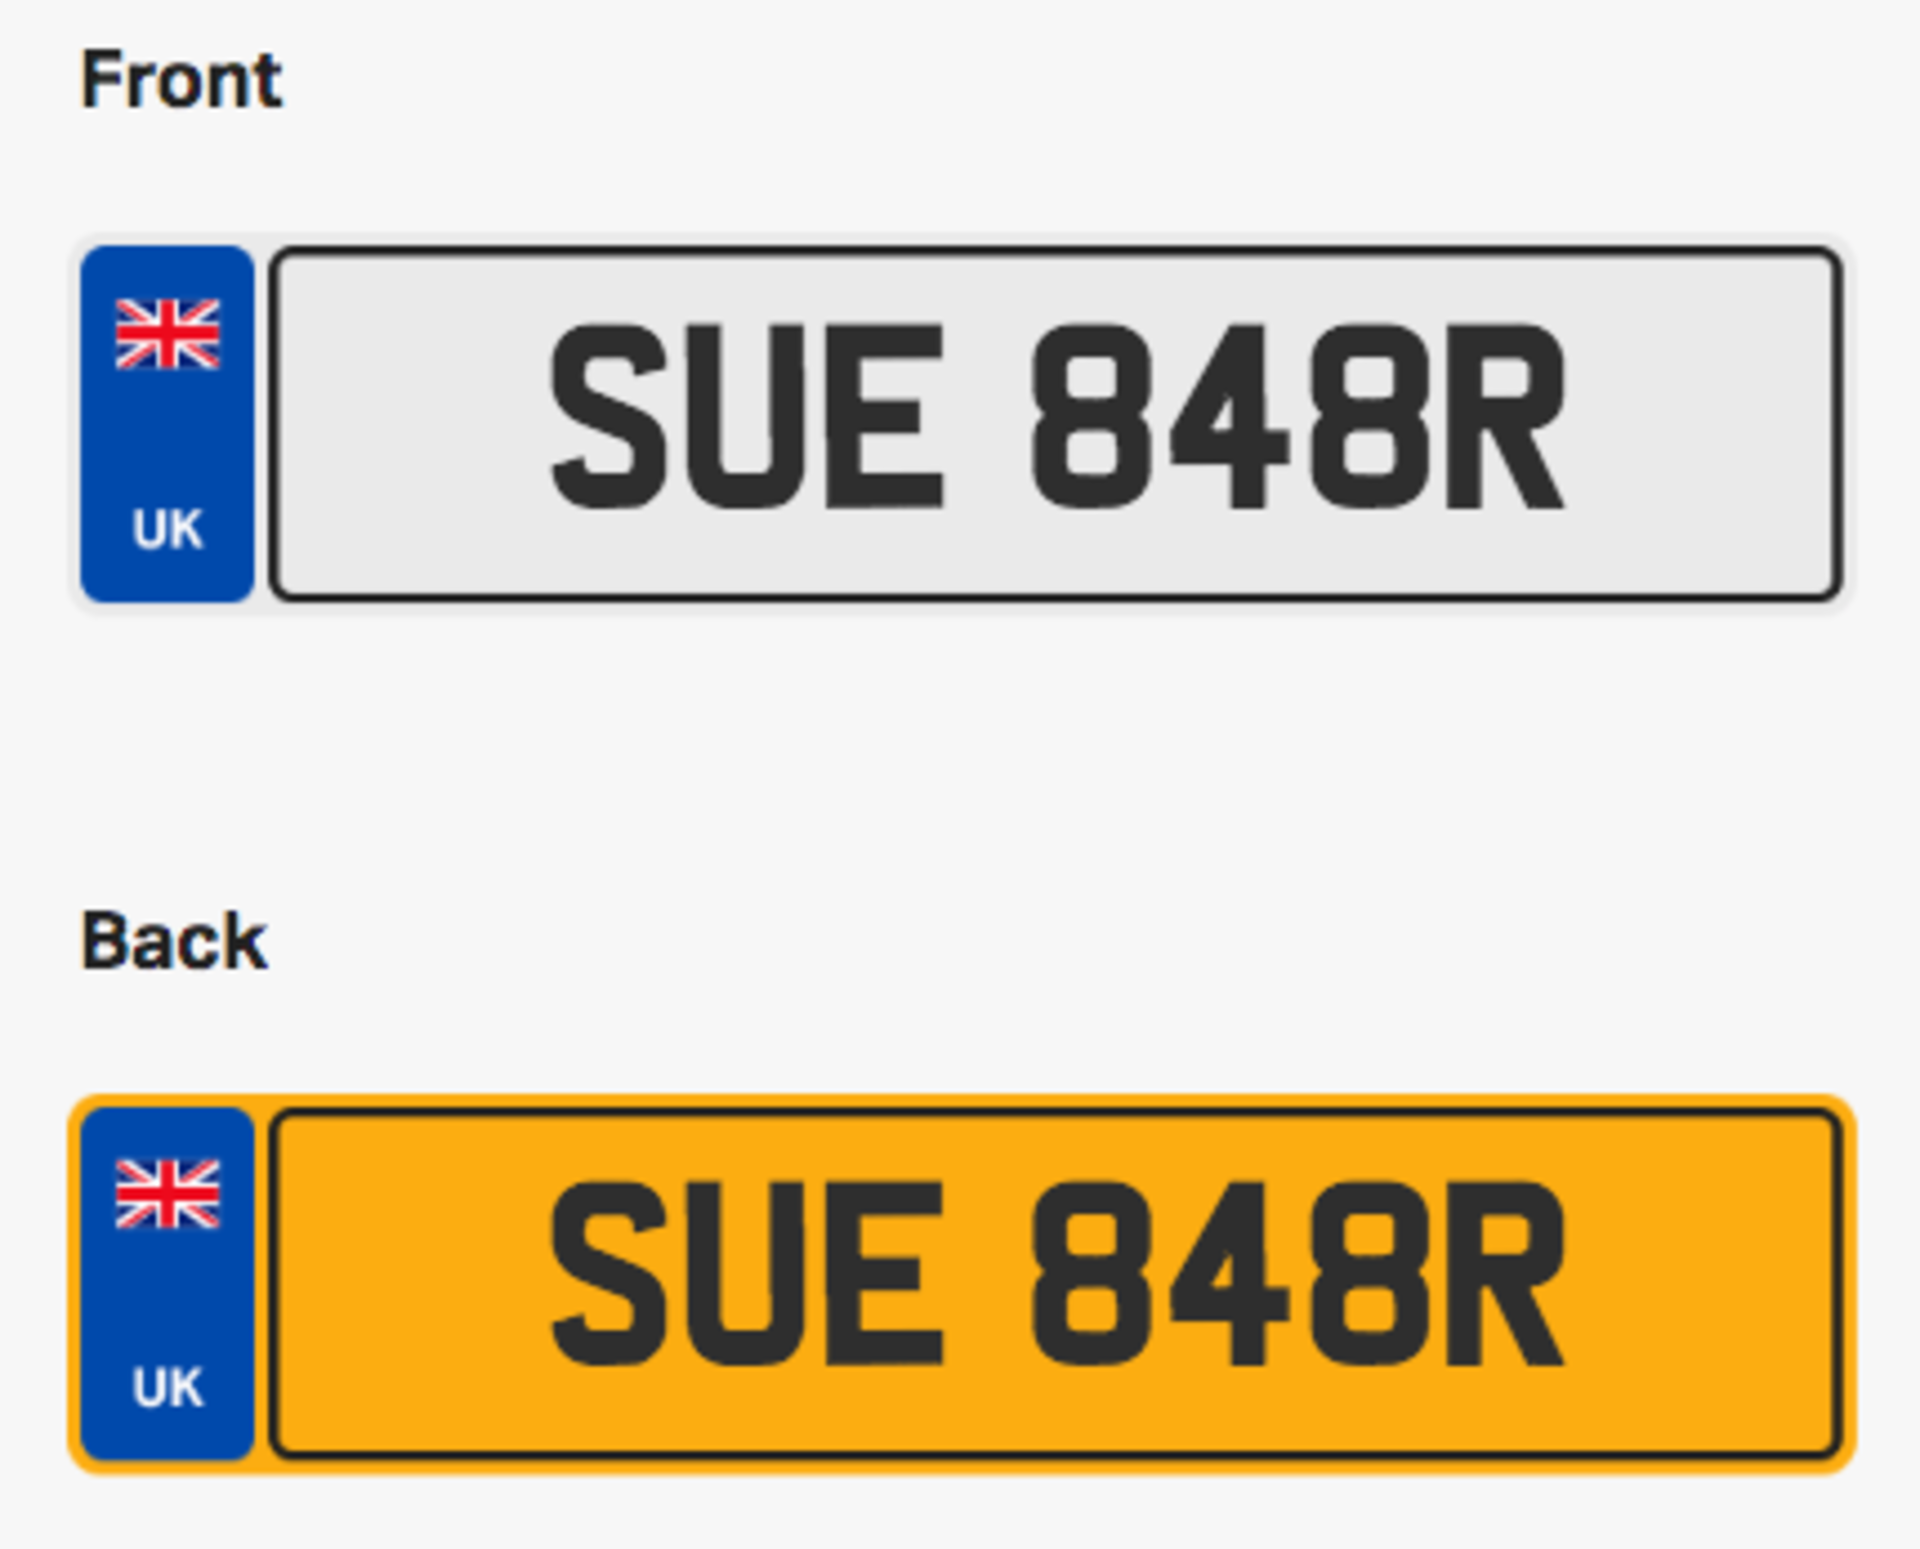 SUE 848R. Private vehicle registration number plate, ready to transfer to new owner